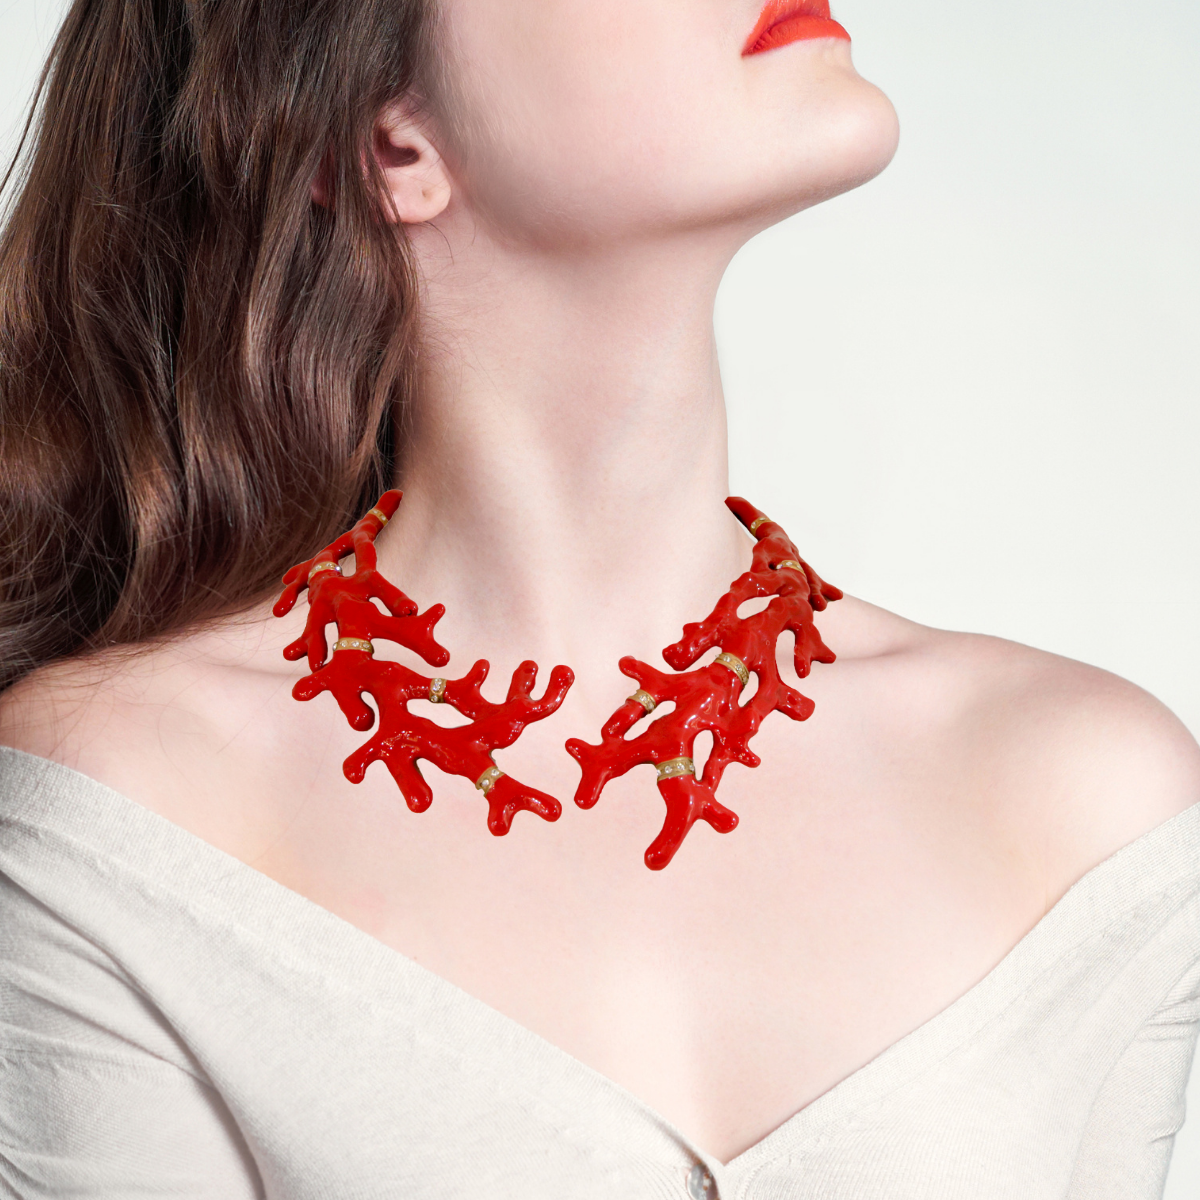 Necklace coral-shaped red